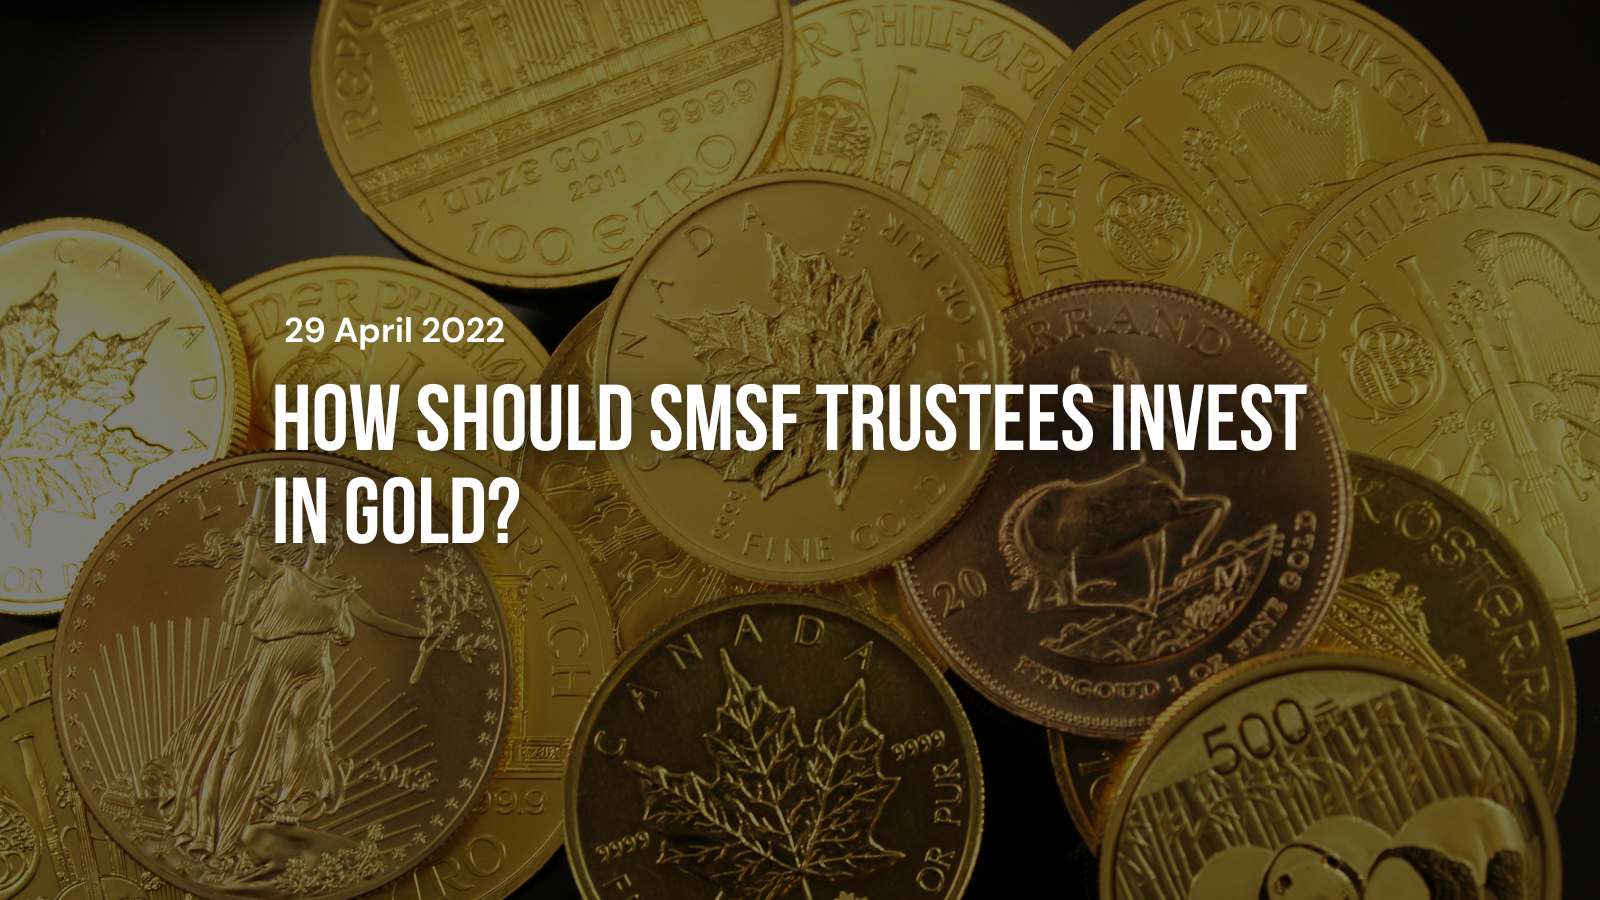 How should SMSF trustees invest in gold?